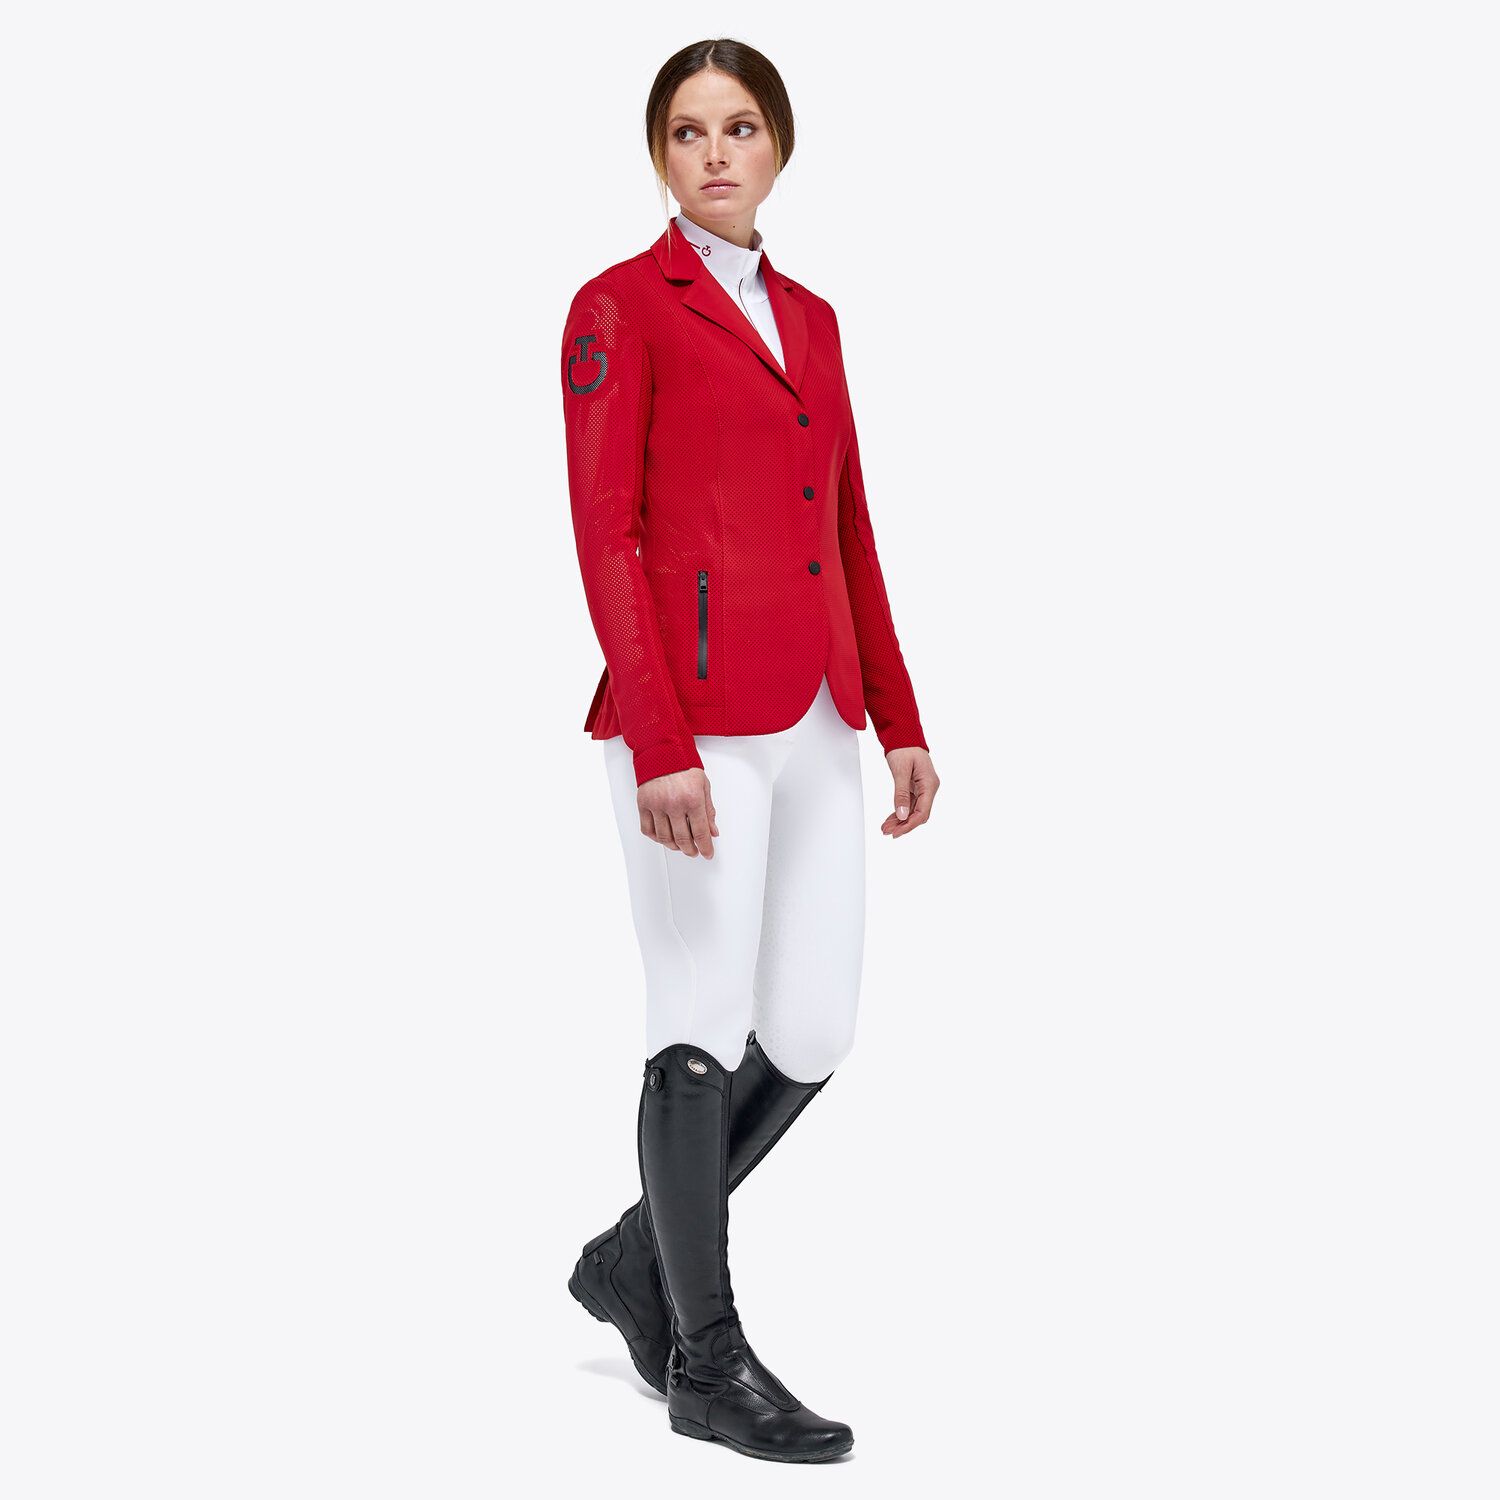 Cavalleria Toscana Women's competition riding jacket embroidery RED-3